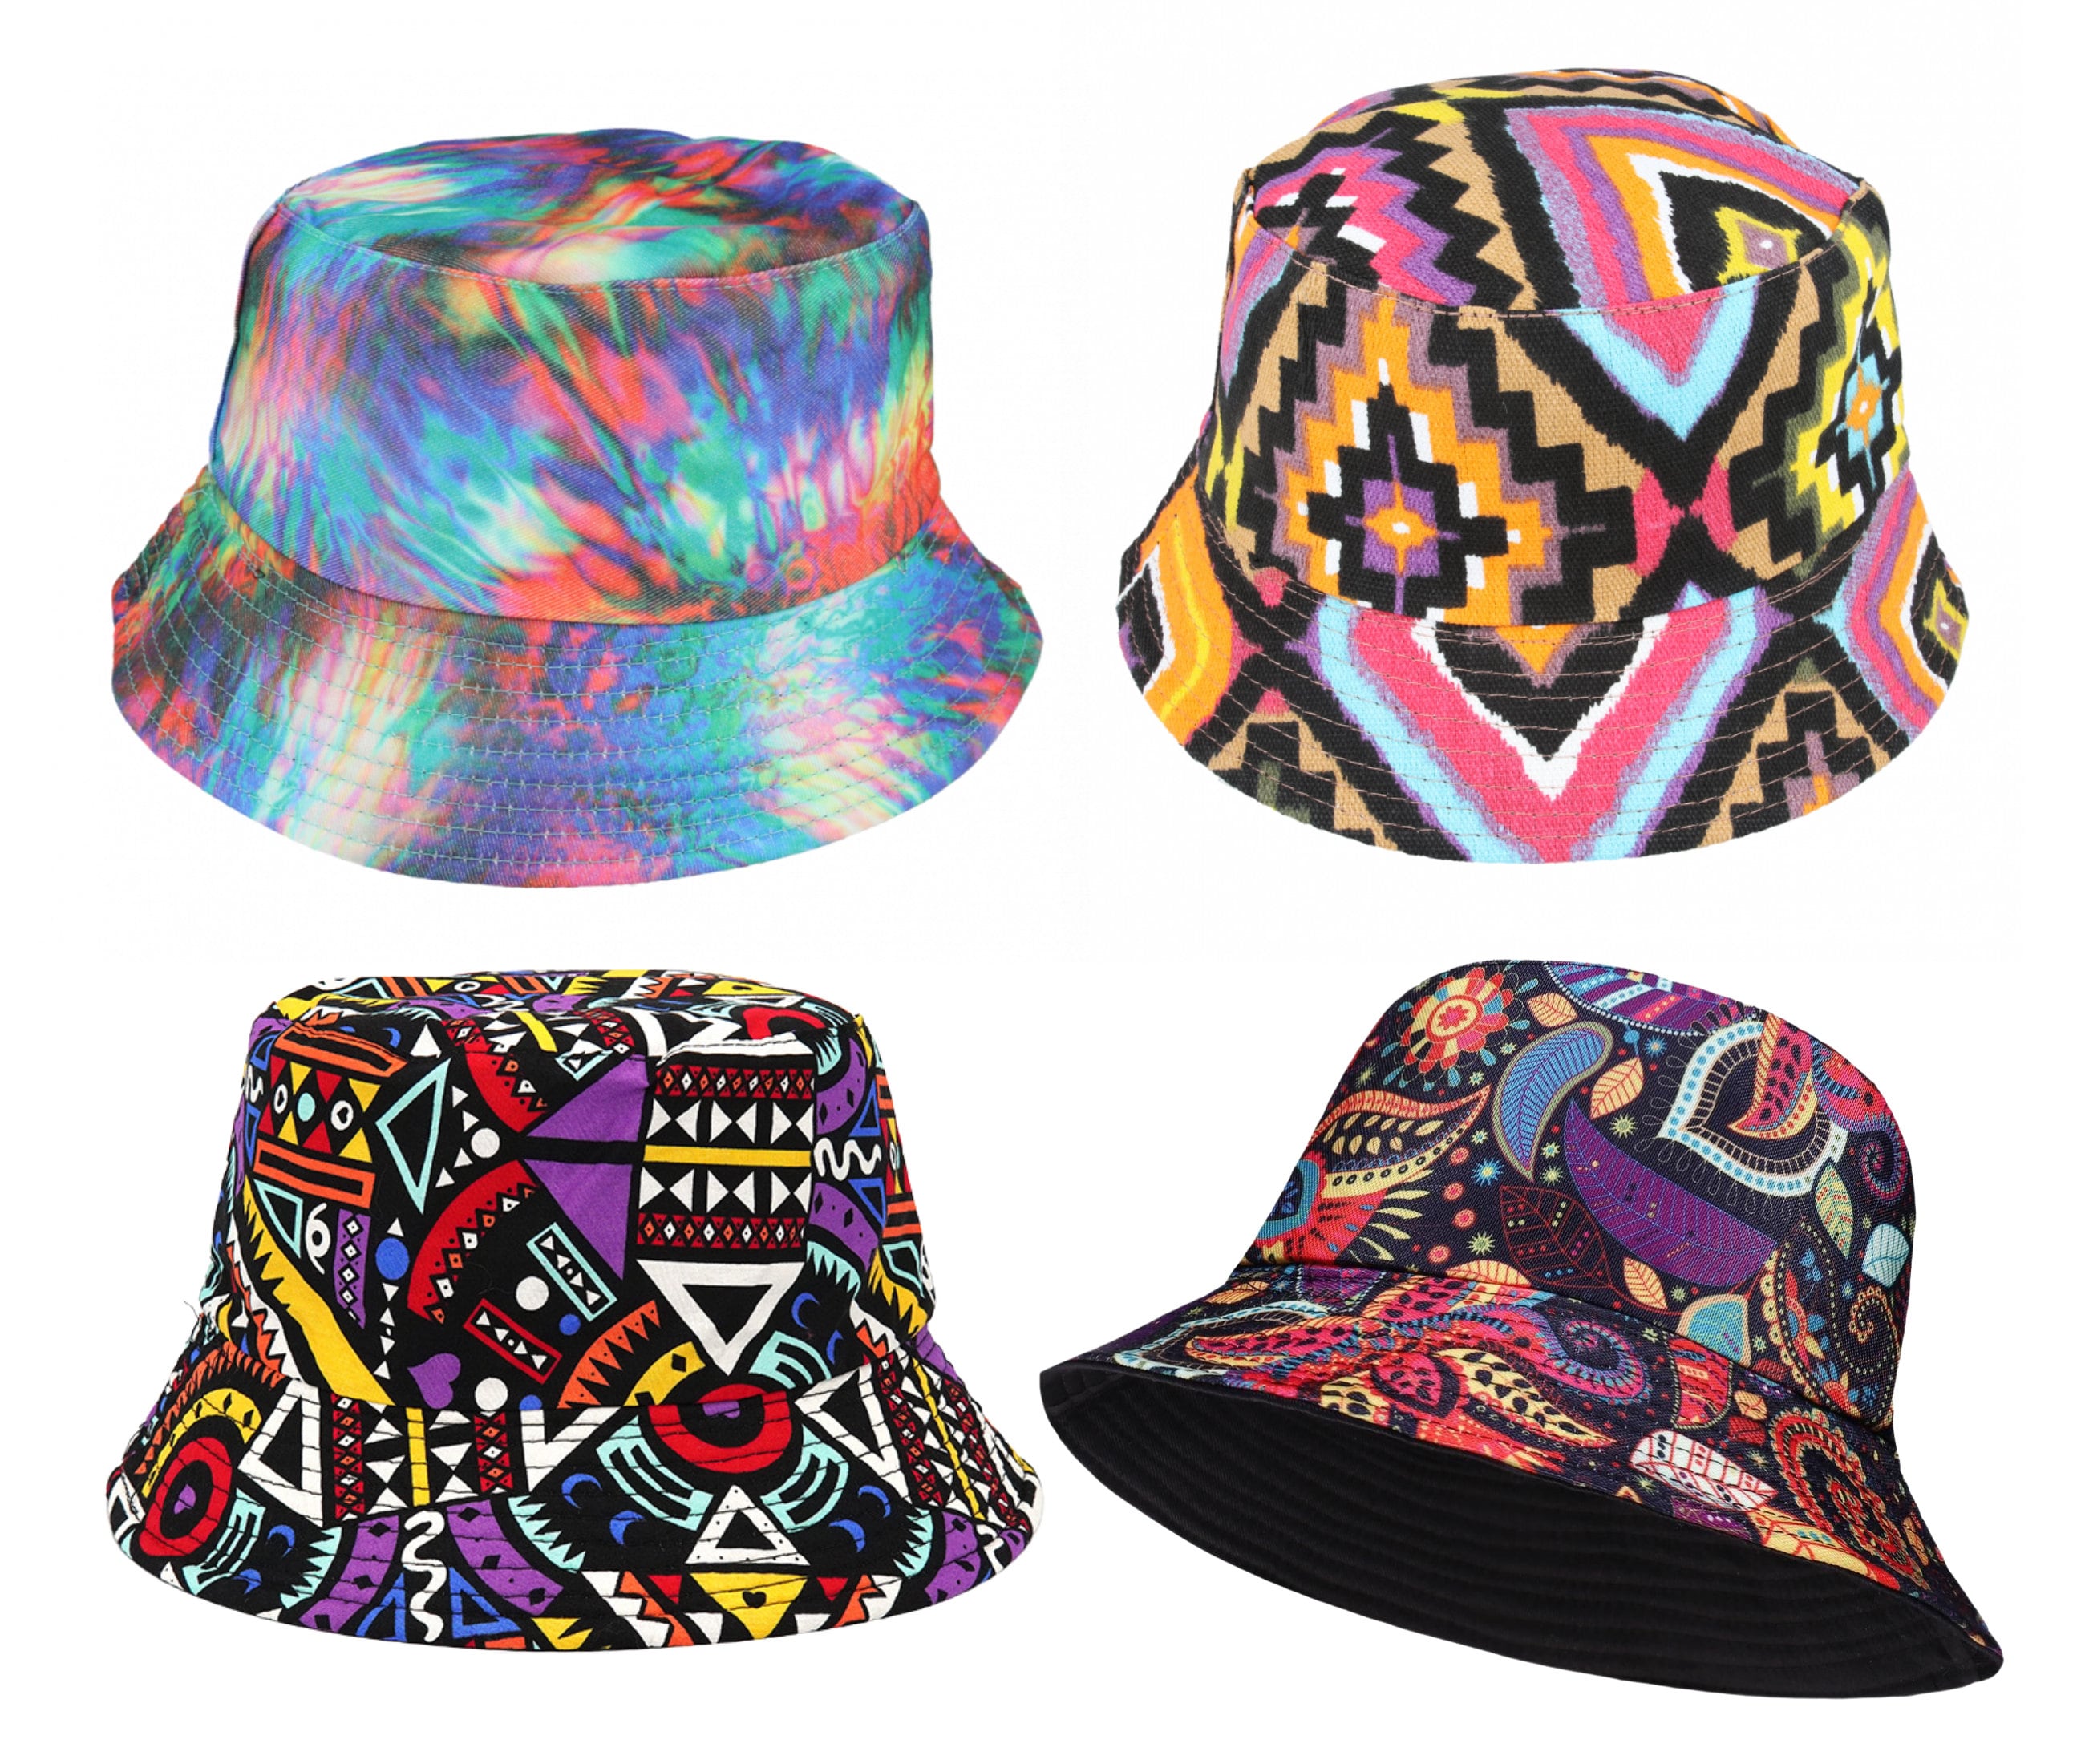 S A Company Bucket Hat UV 50+ for Adults